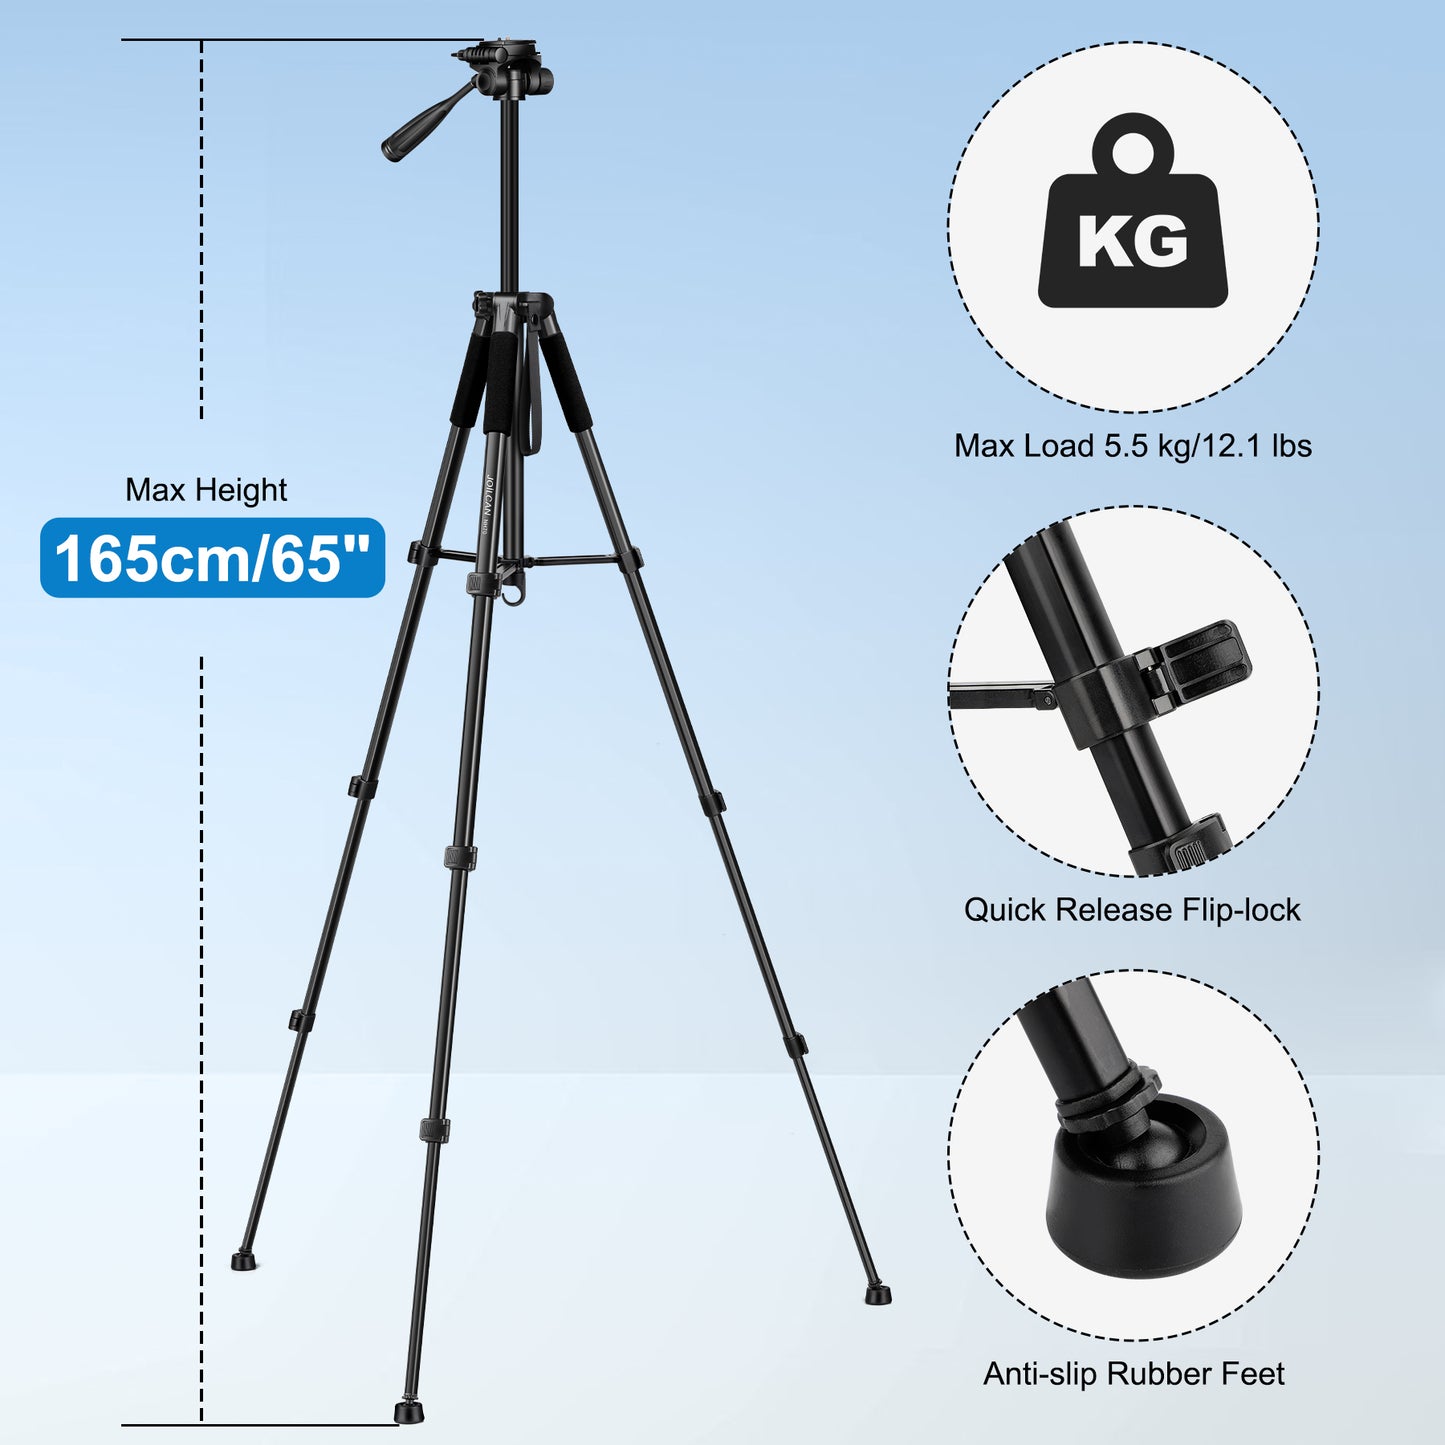 JOILCAN Camera Tripod for Canon Nikon Sony, 65" Aluminum Alloy Tripod Stand with Detachable Head & Phone Holder & Carry Bag, Lightweight DSLR Tripod for Smartphone/Vlog/Streaming, Max Load 5.5kg(EU)